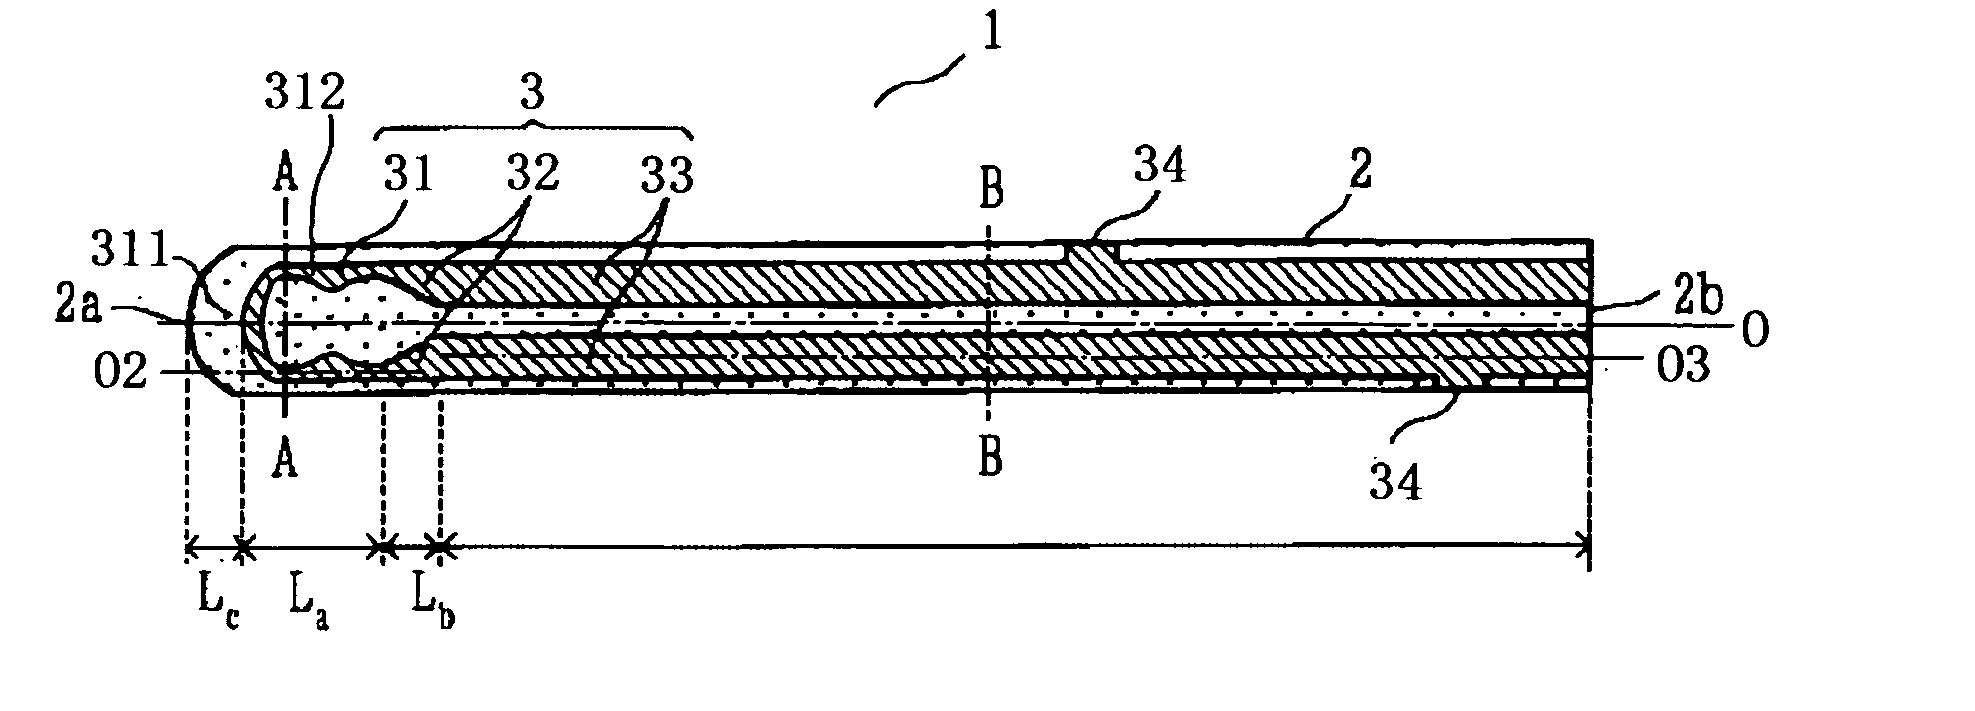 Ceramic Heater, Method of Producing the Same, and Glow Plug Using a Ceramic Heater